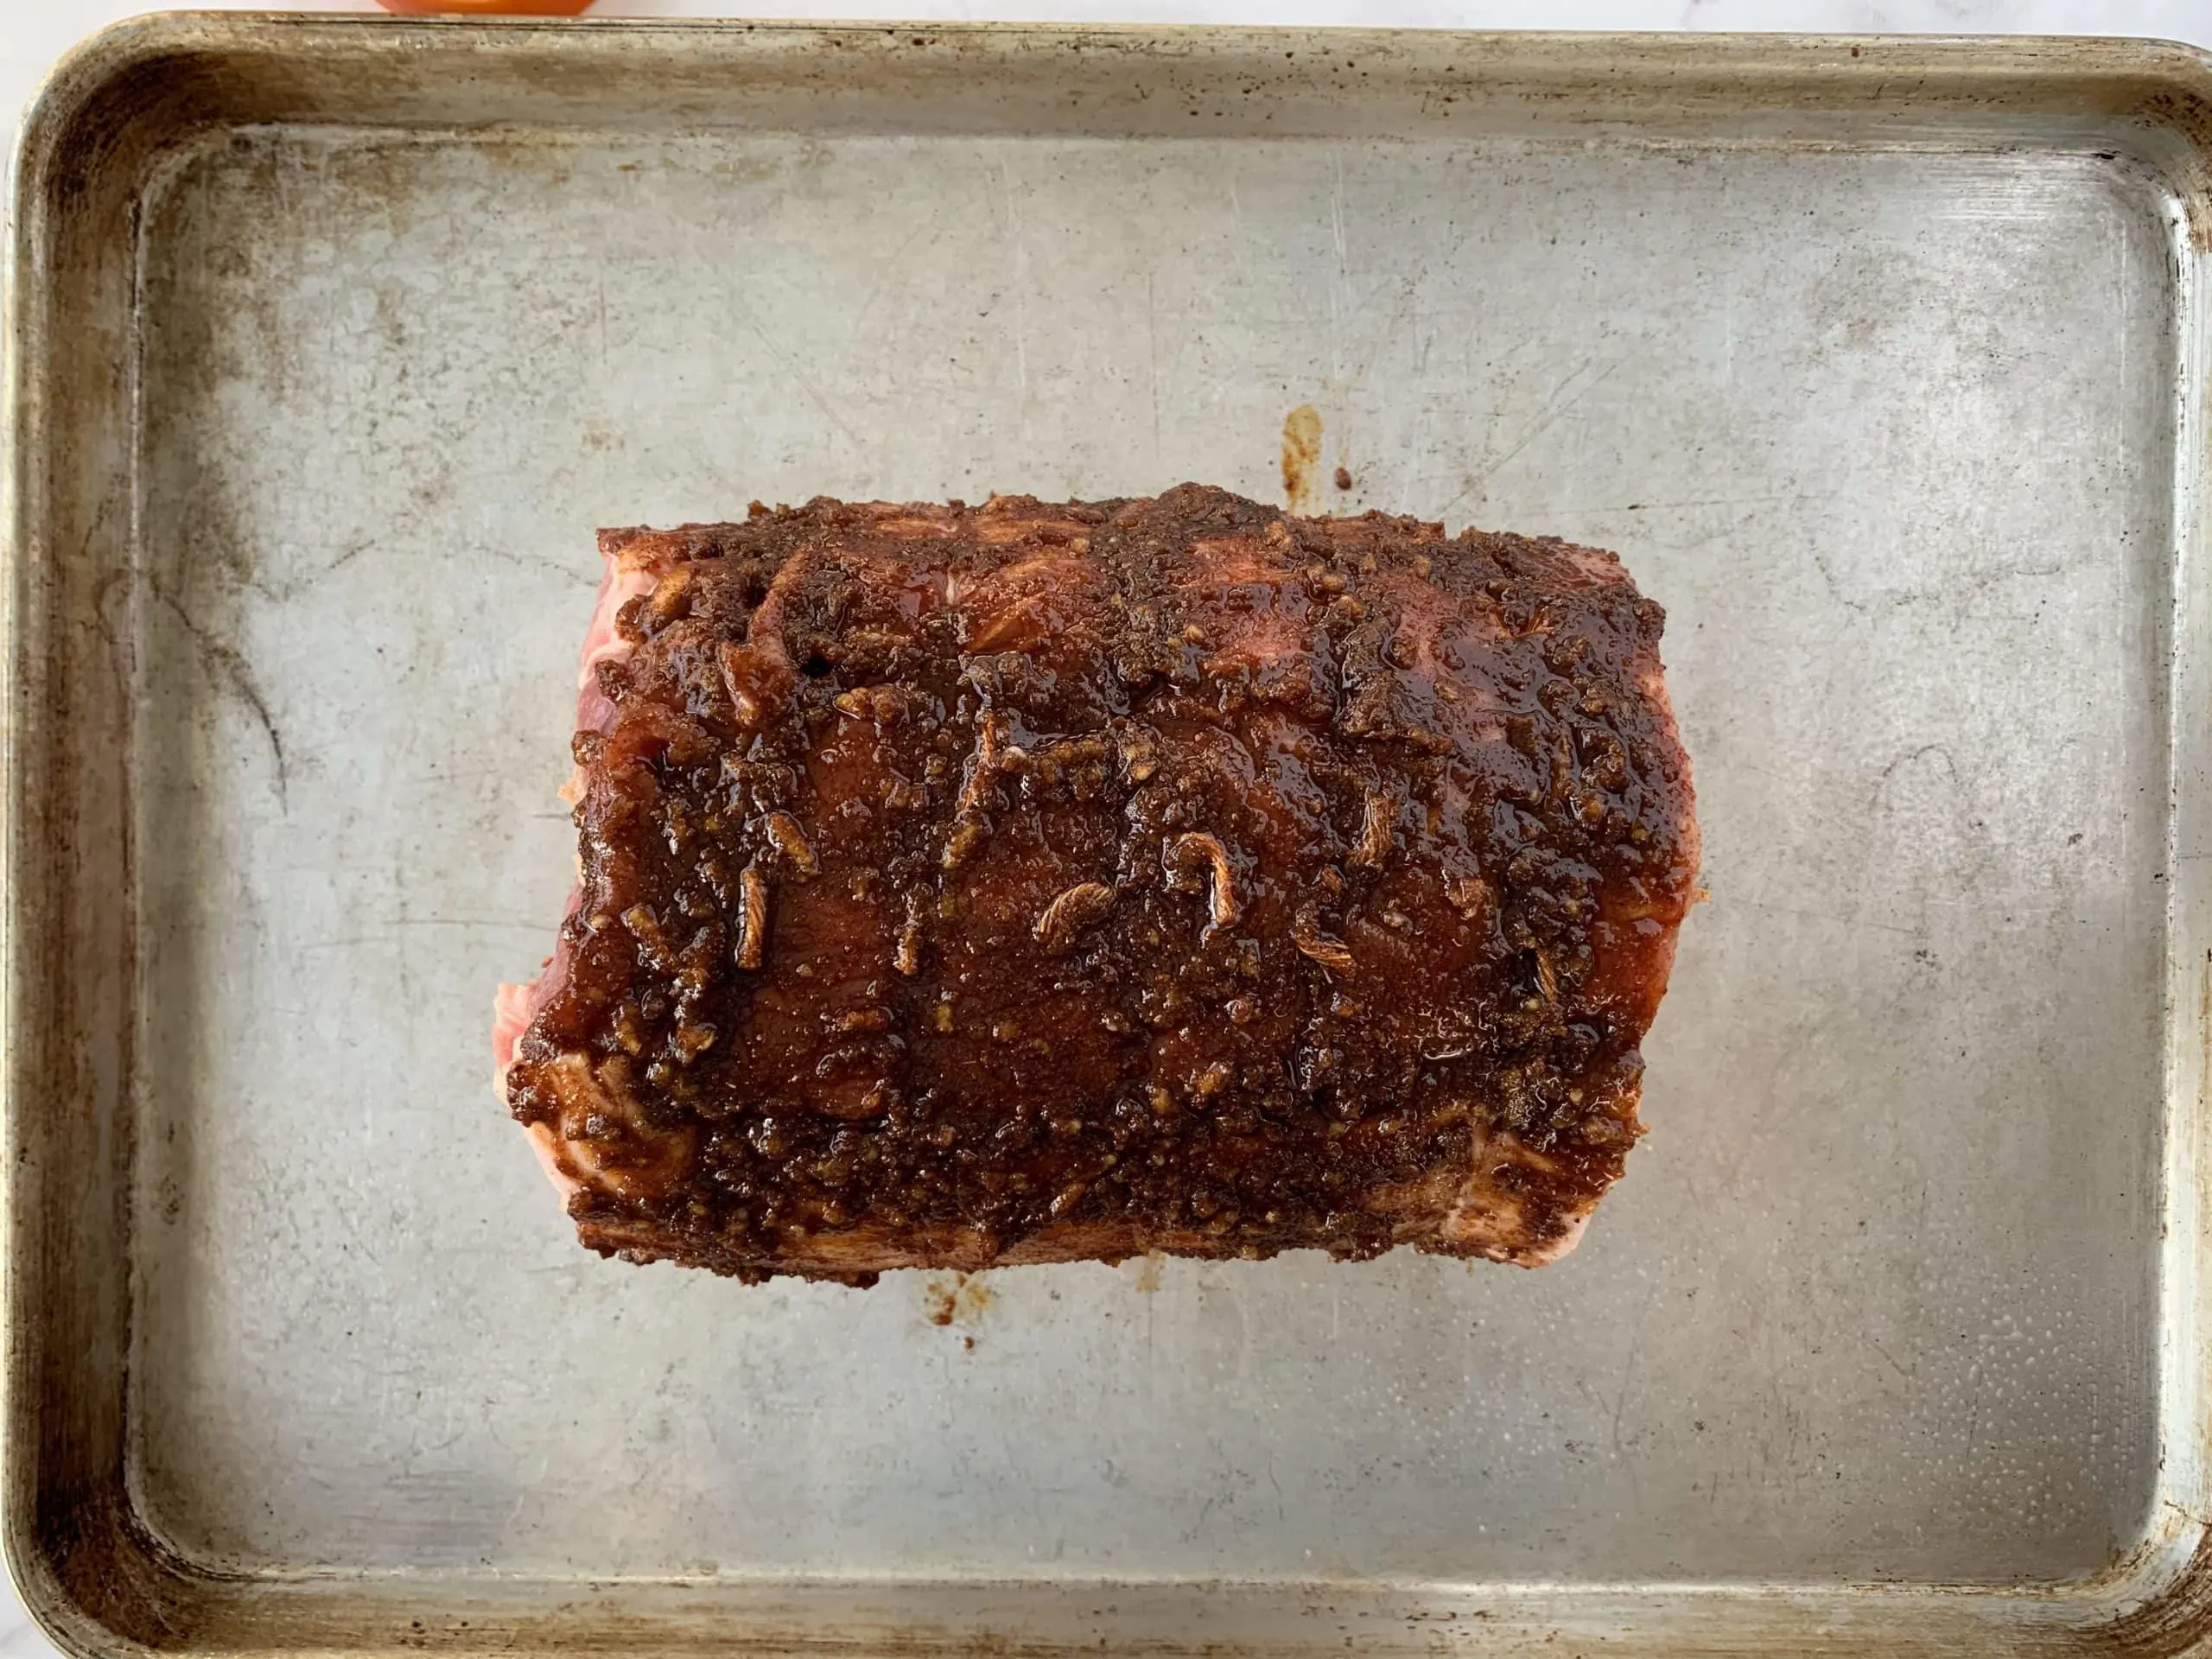 how to butterfly a pork loin